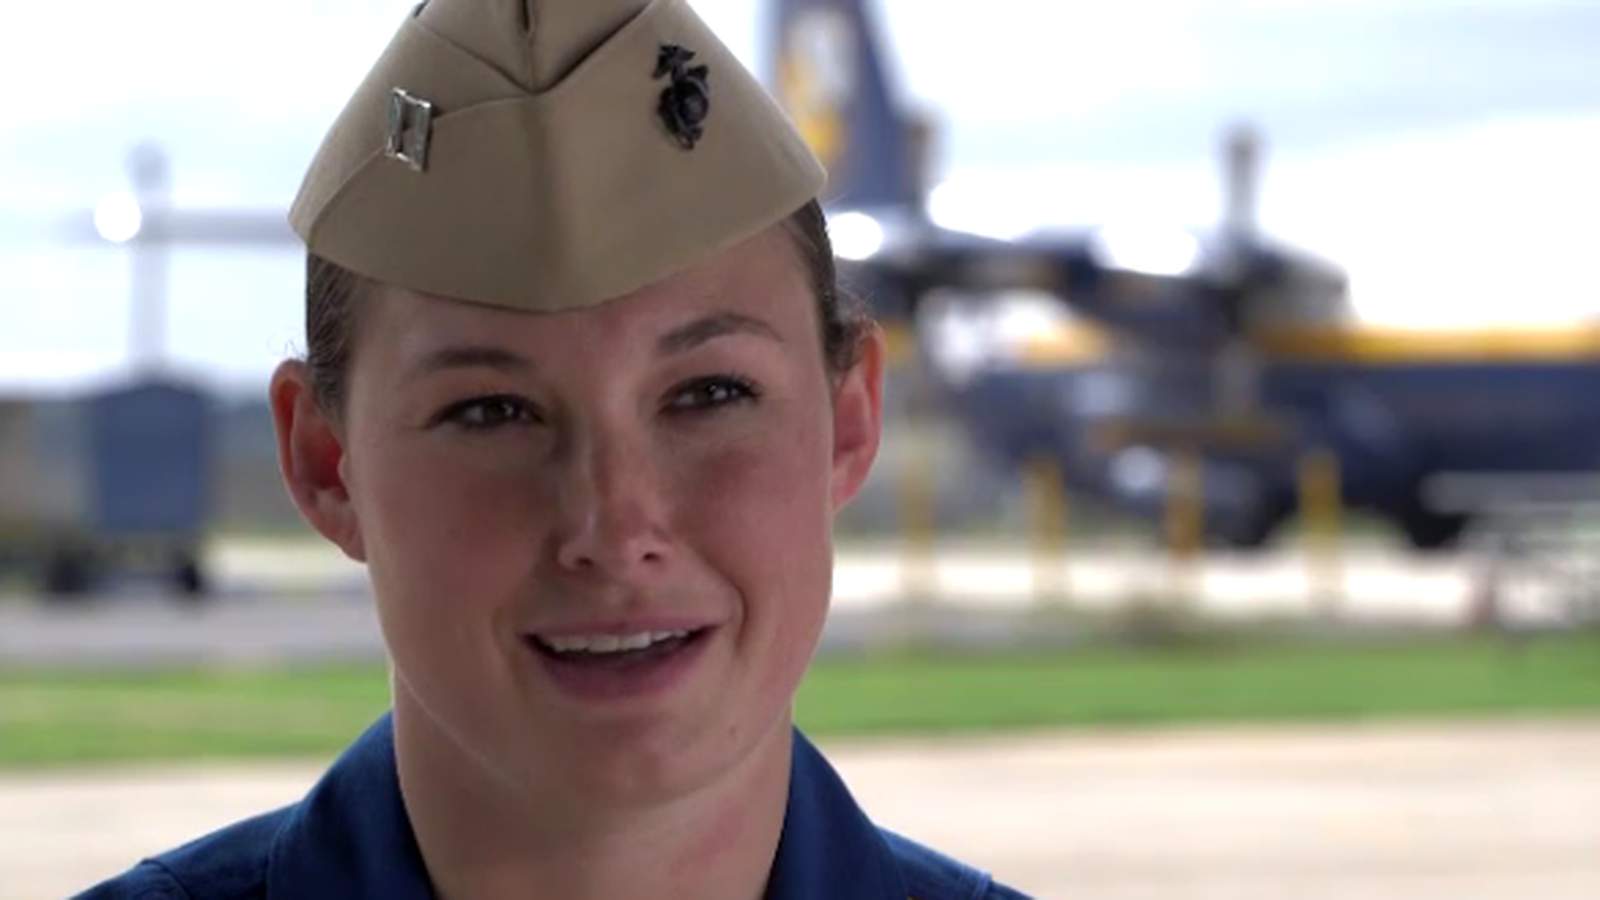 ‘The sky is the limit,’ says first female Blue Angels pilot